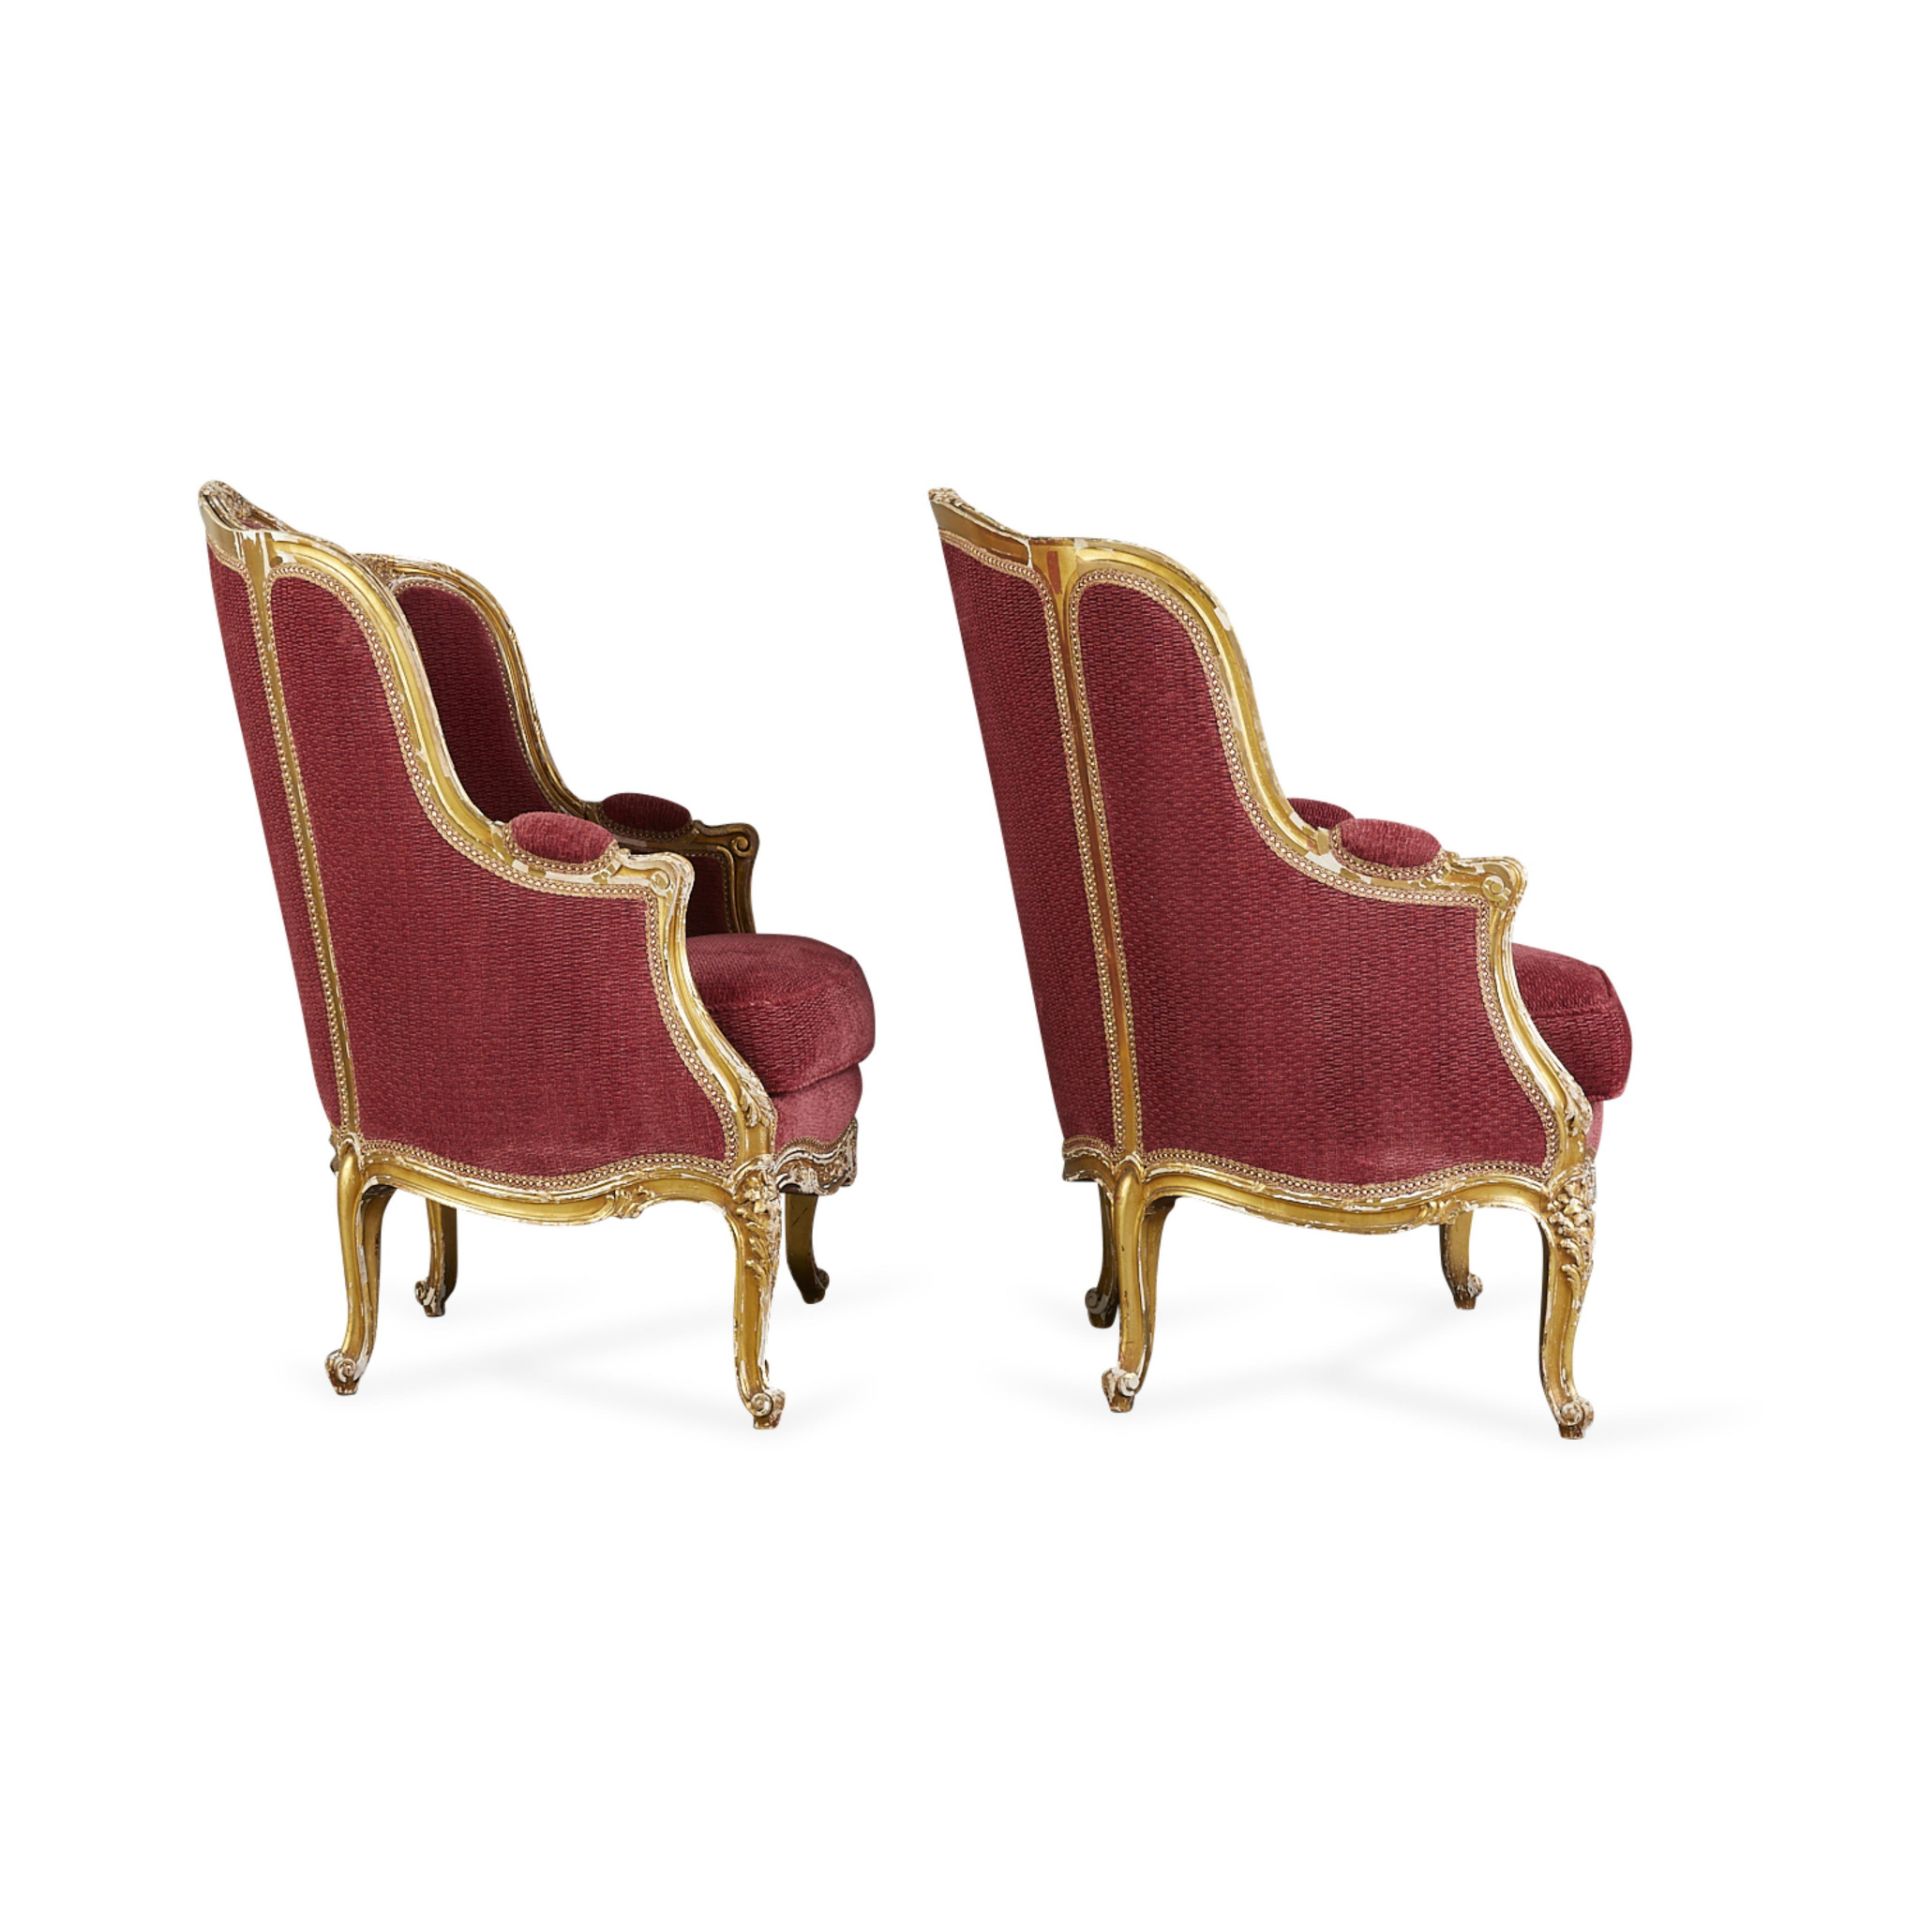 Pair of Louis XV Style Gilt Armchairs - Image 7 of 12